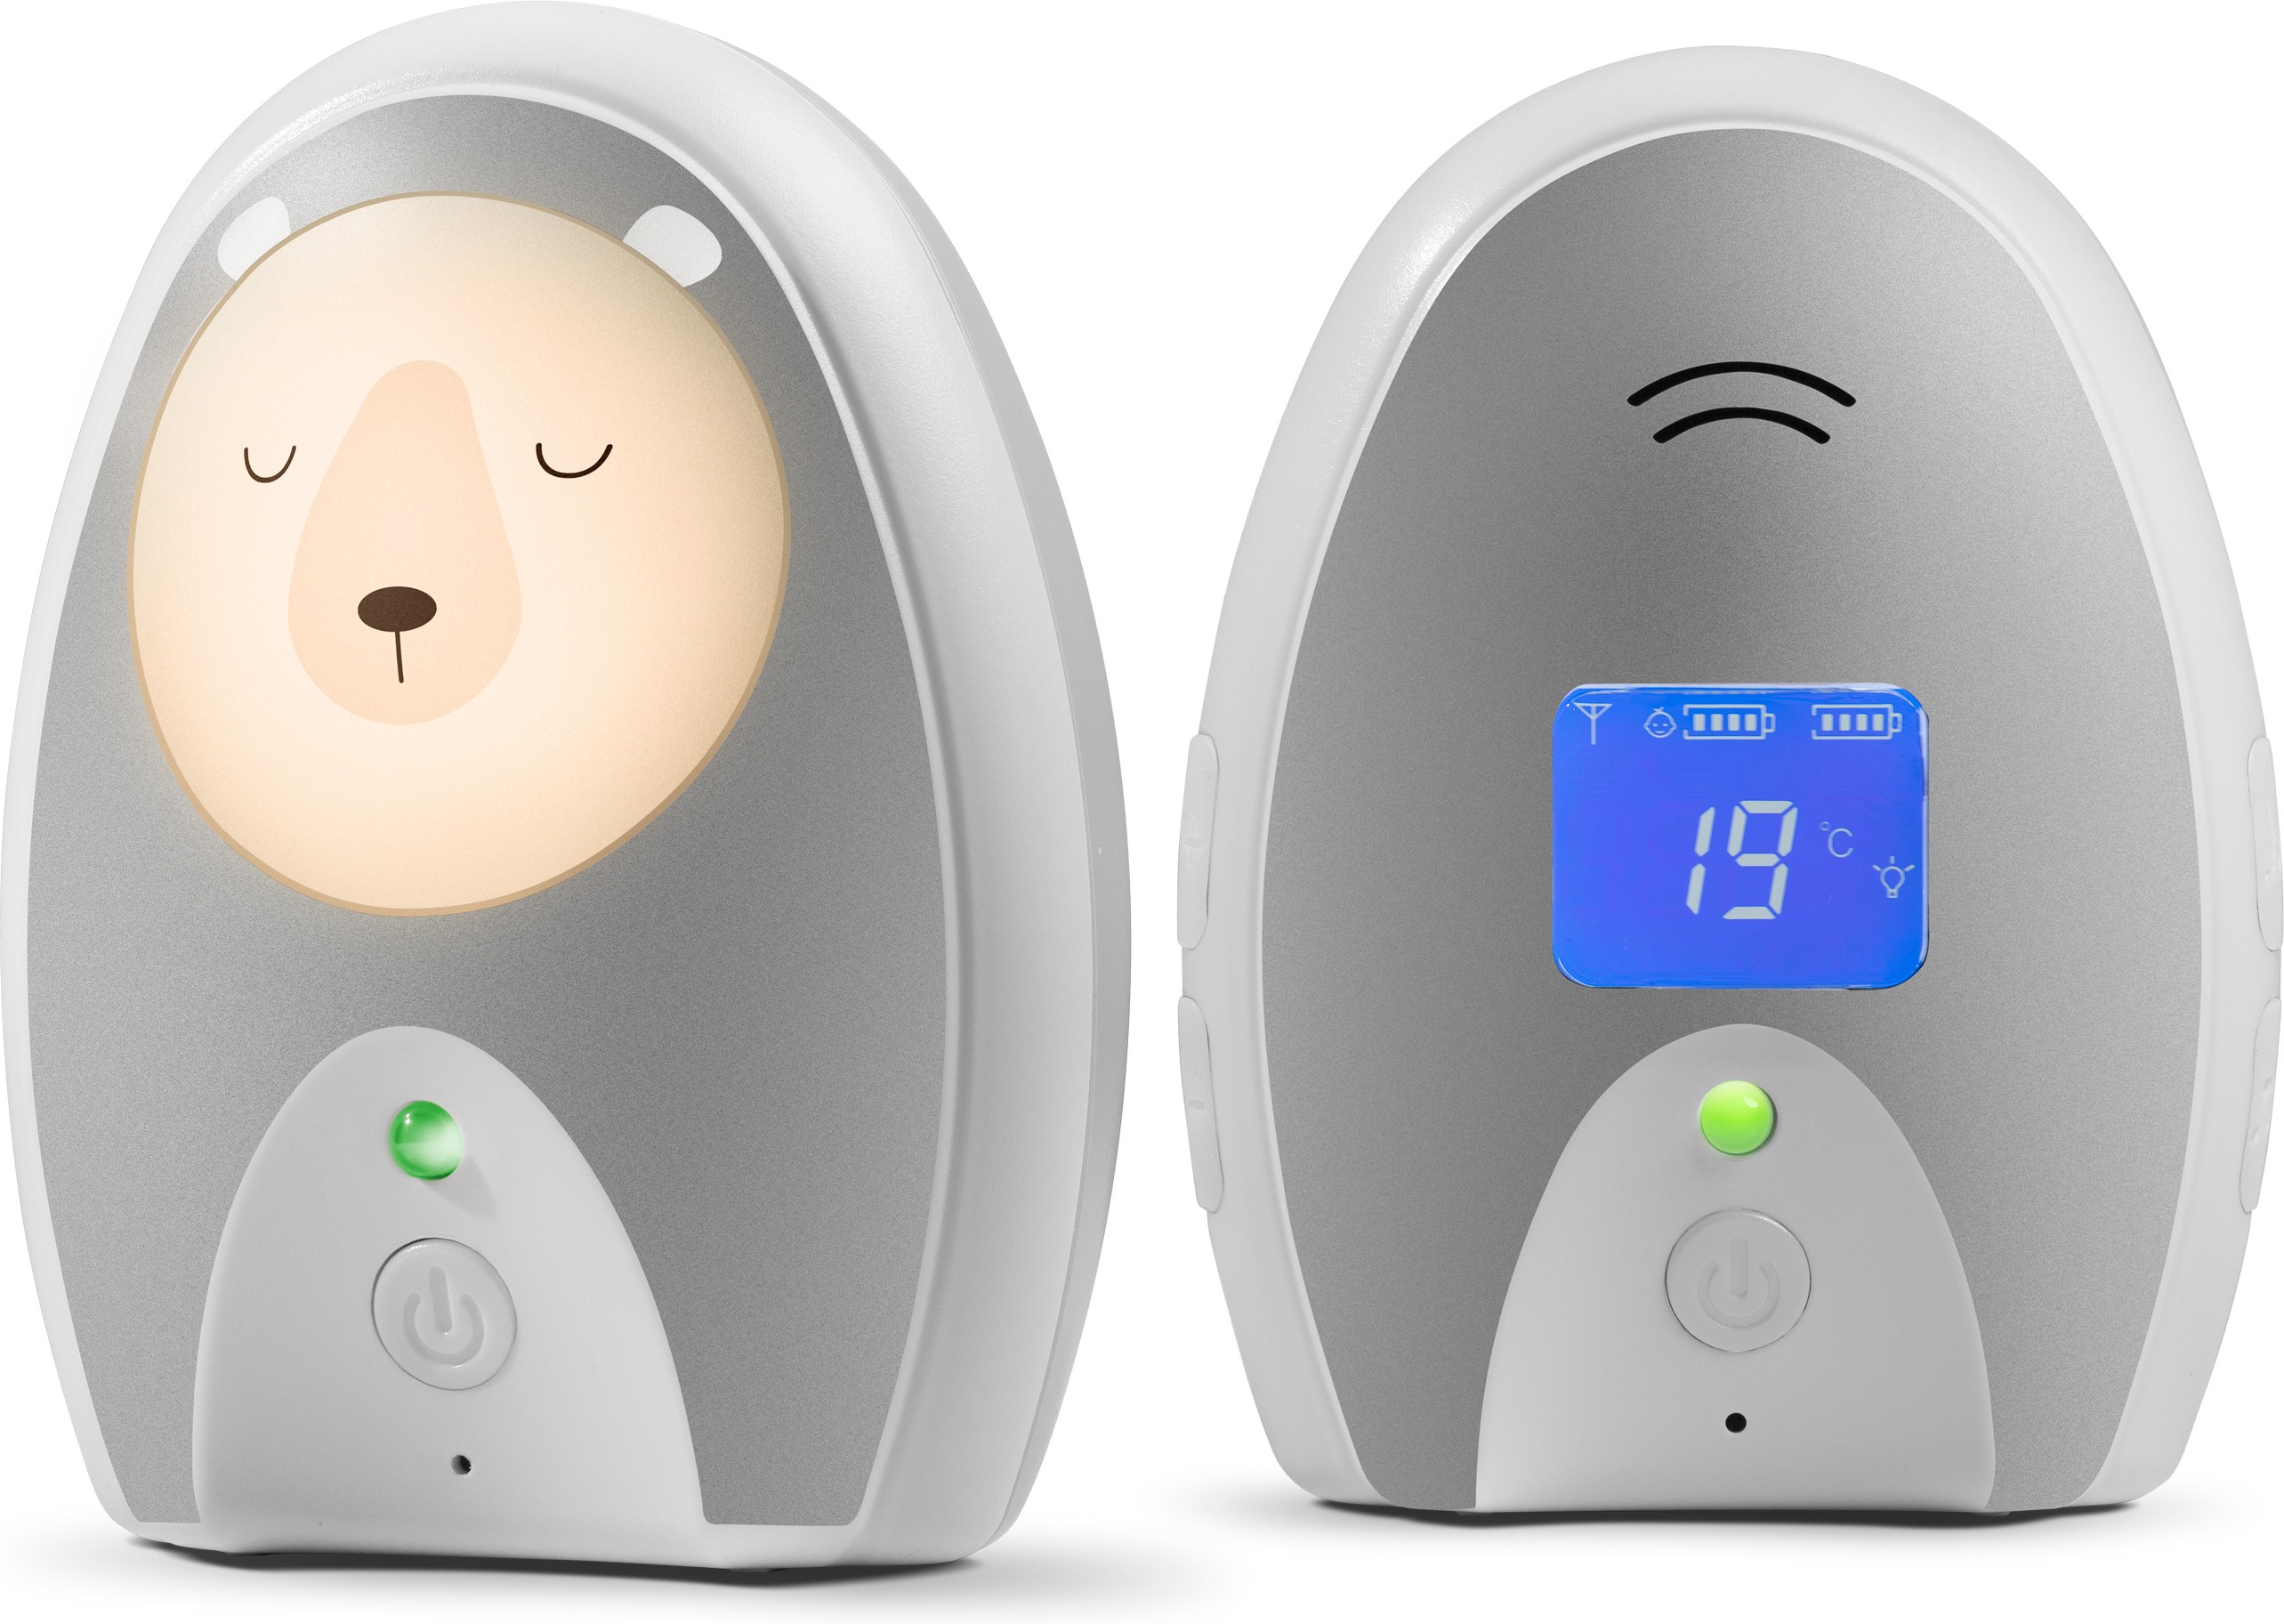 Philips Avent Scd503/00 -vigilabebés With Privacy Y Security Dect